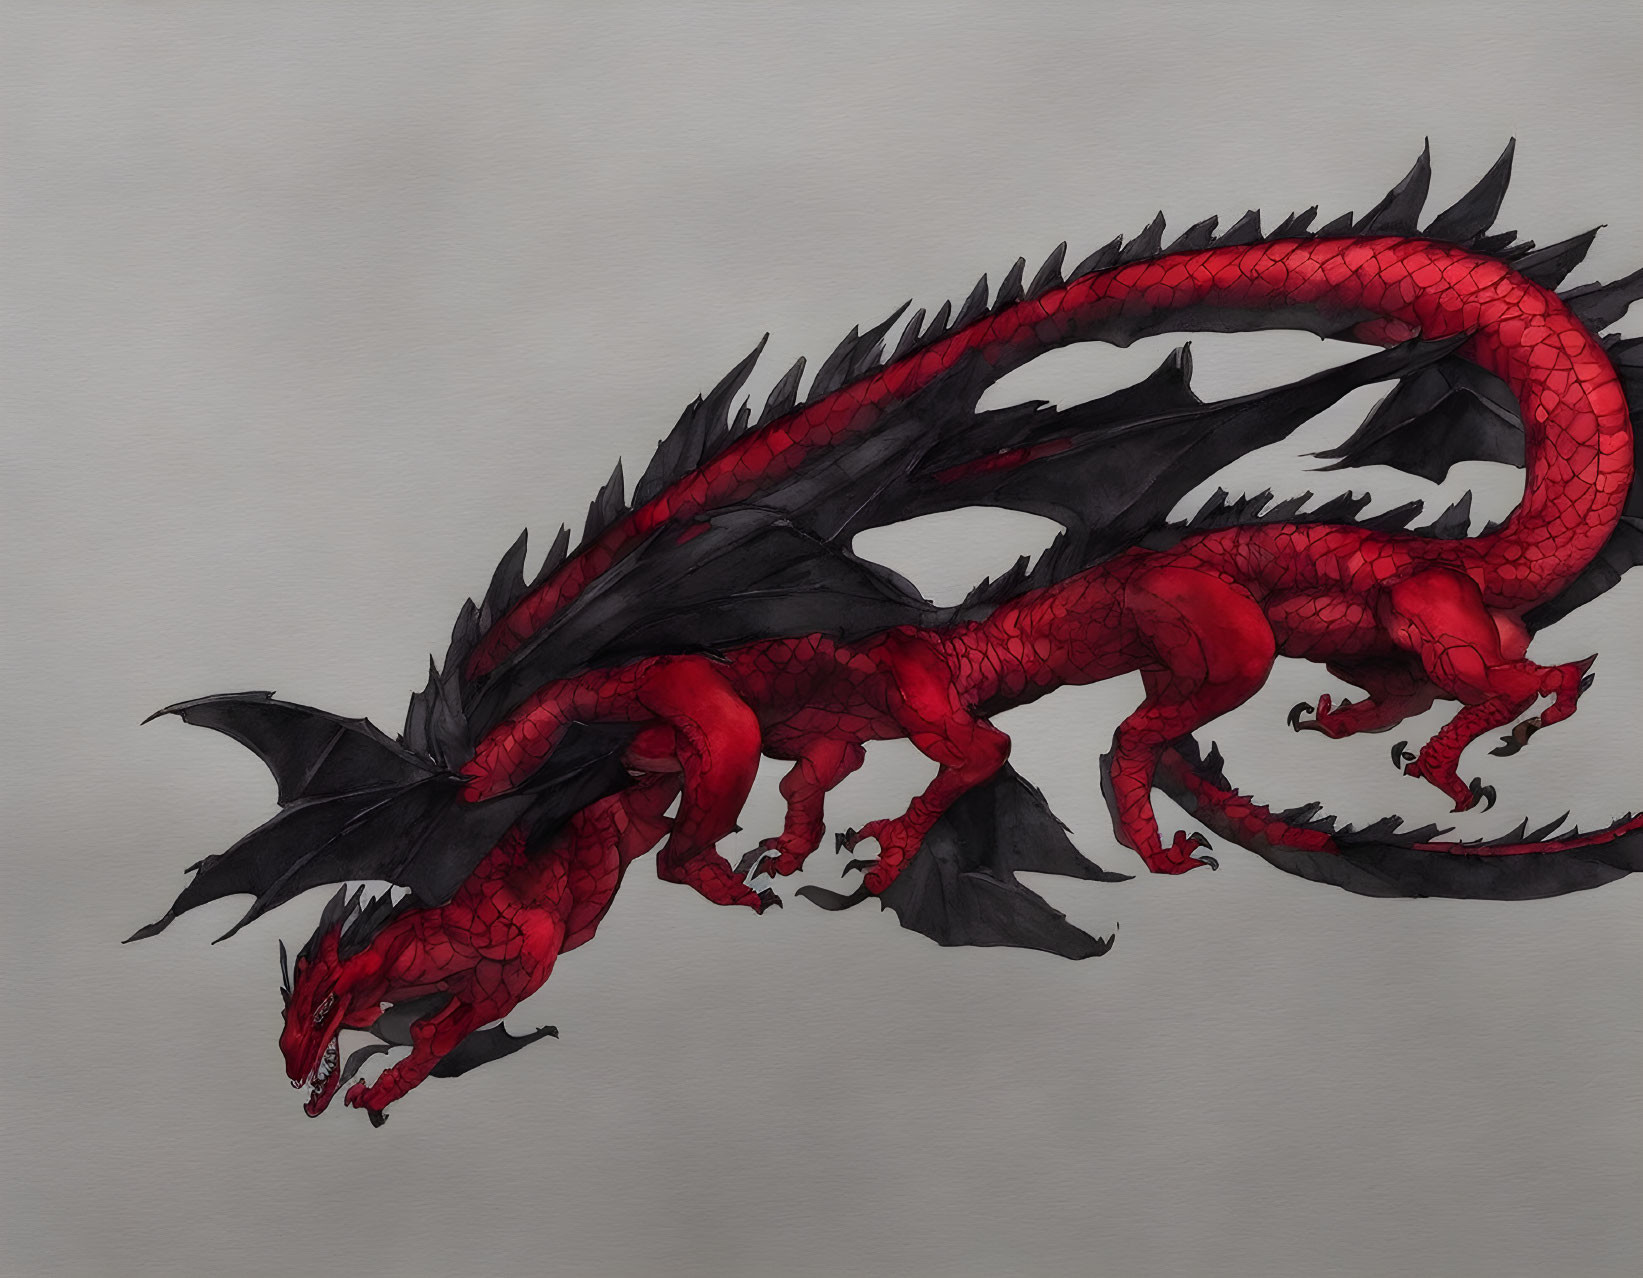 Detailed Illustration of Three-Headed Red Dragon with Black Wings